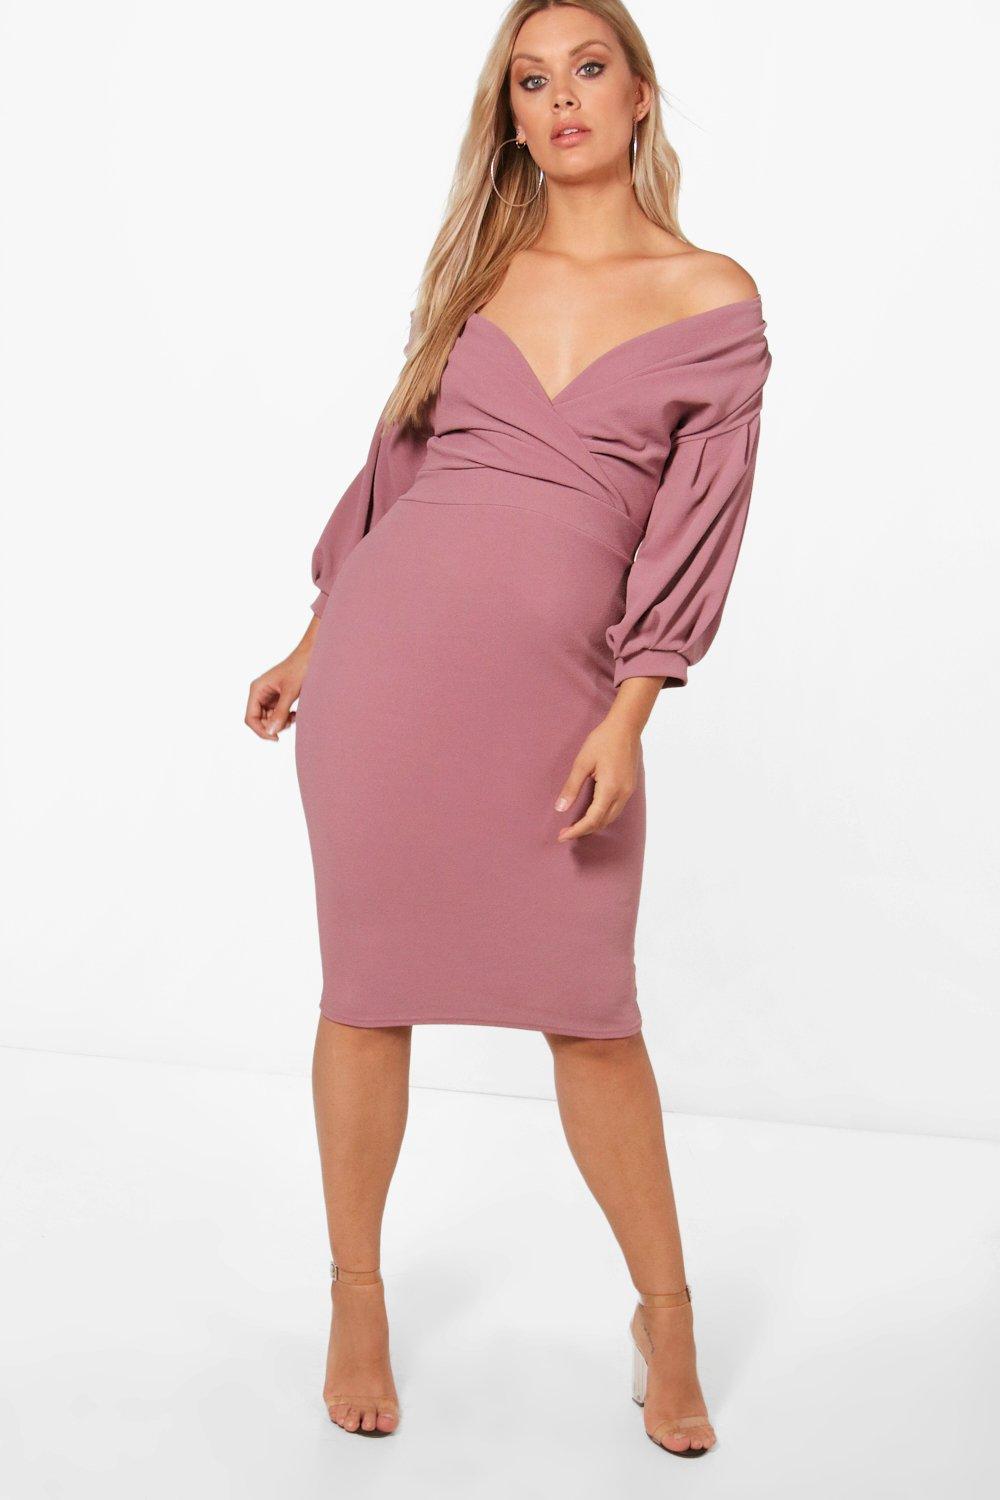 5 Websites With Cheap Plus Size Wedding Guest Dresses For Summer